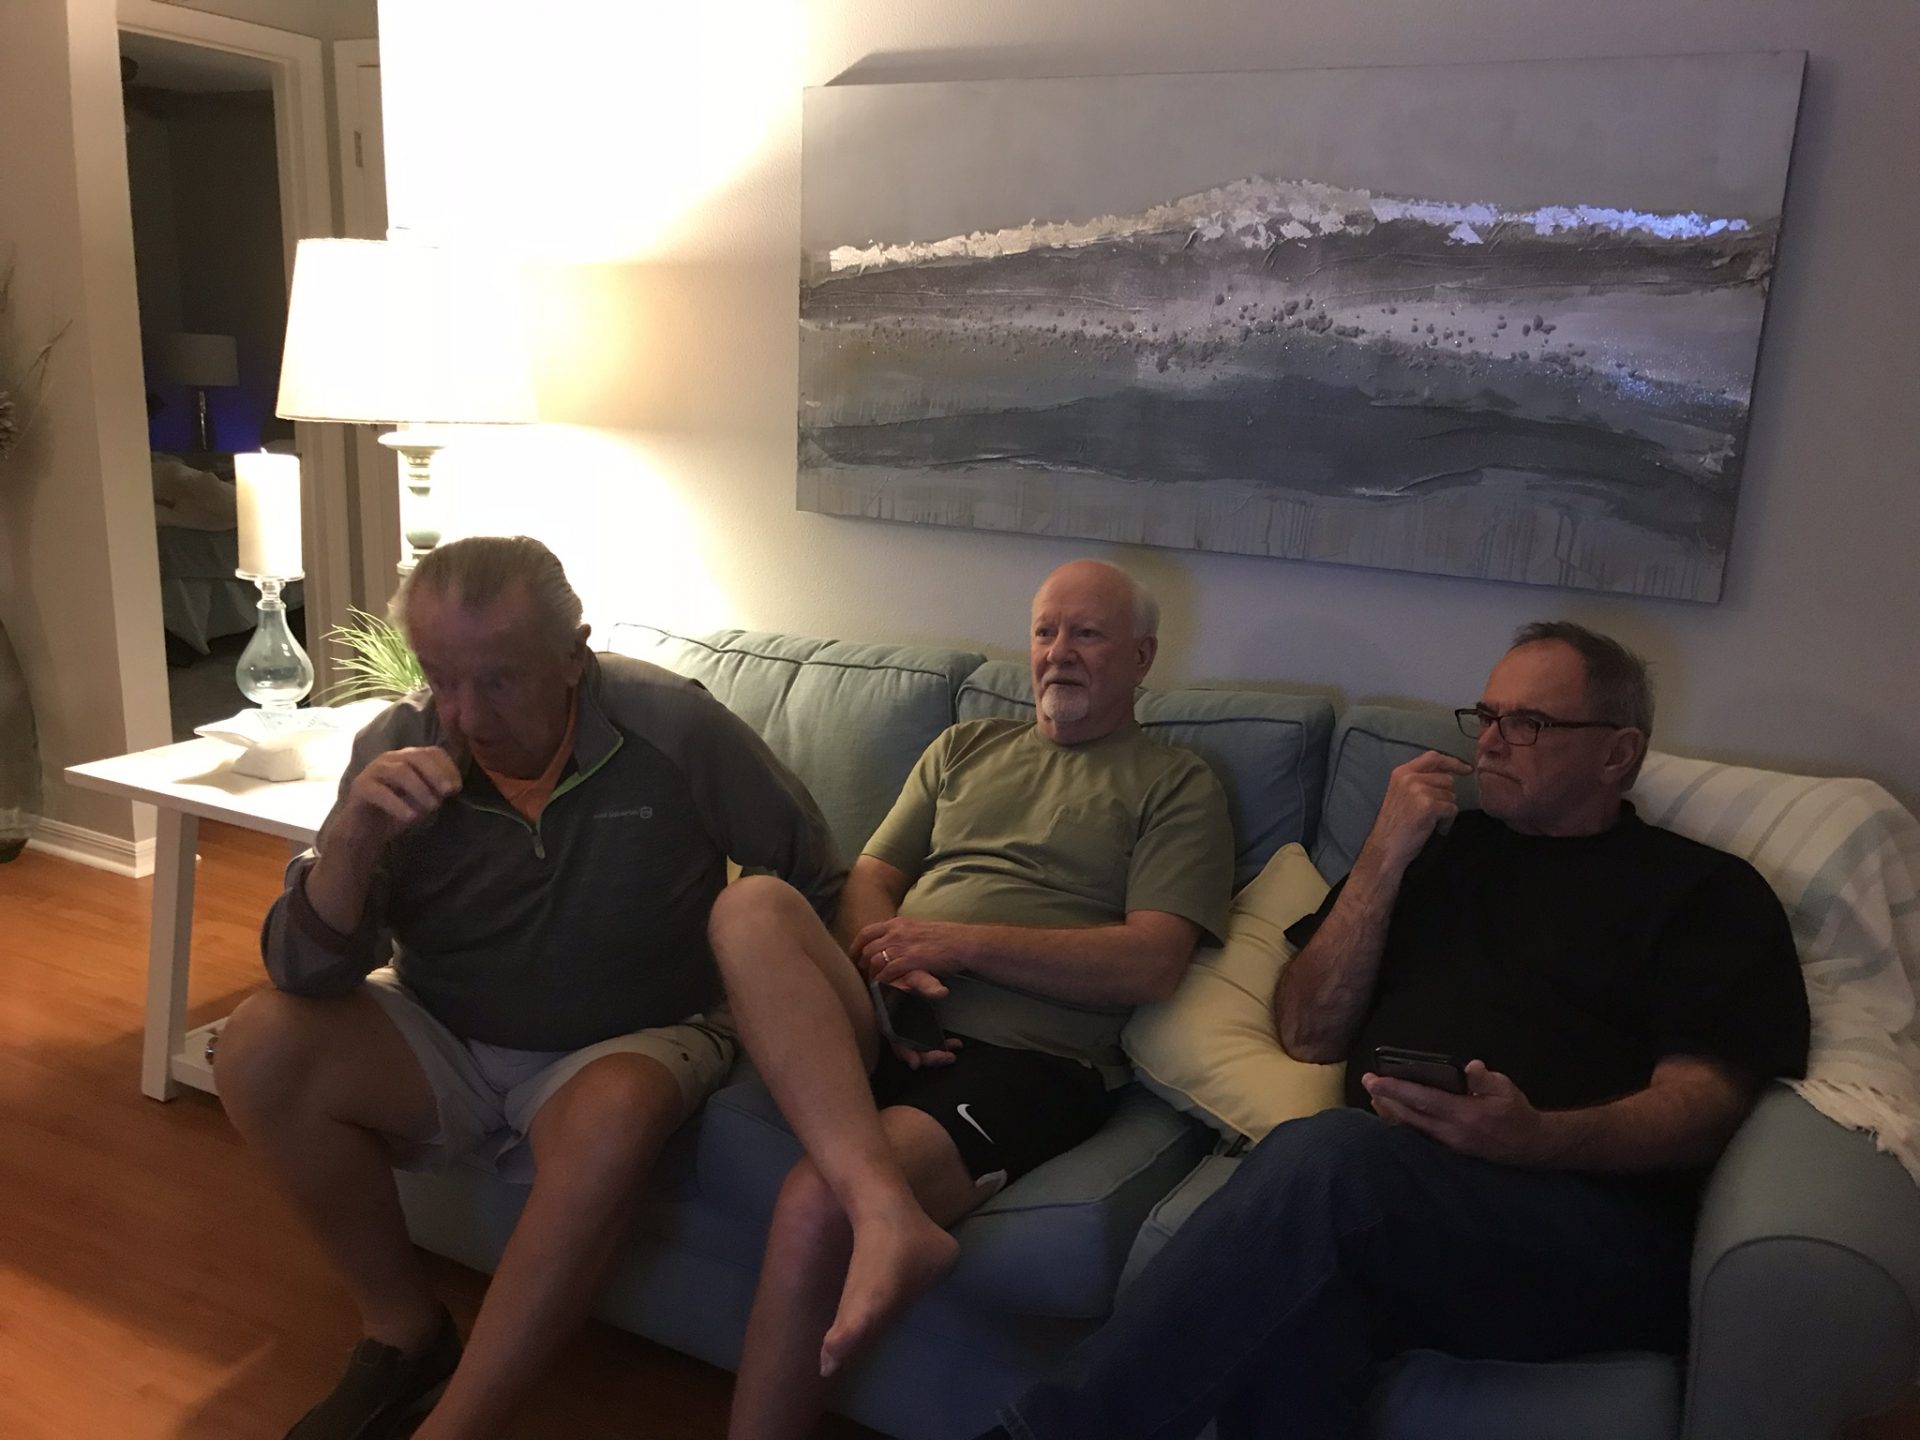 The three boys together in Florida. Those three! Laughter around when they were together. We girls just sat back and laughter along.  Our dear friend will be sooooo missed. Mike and Jessica mox